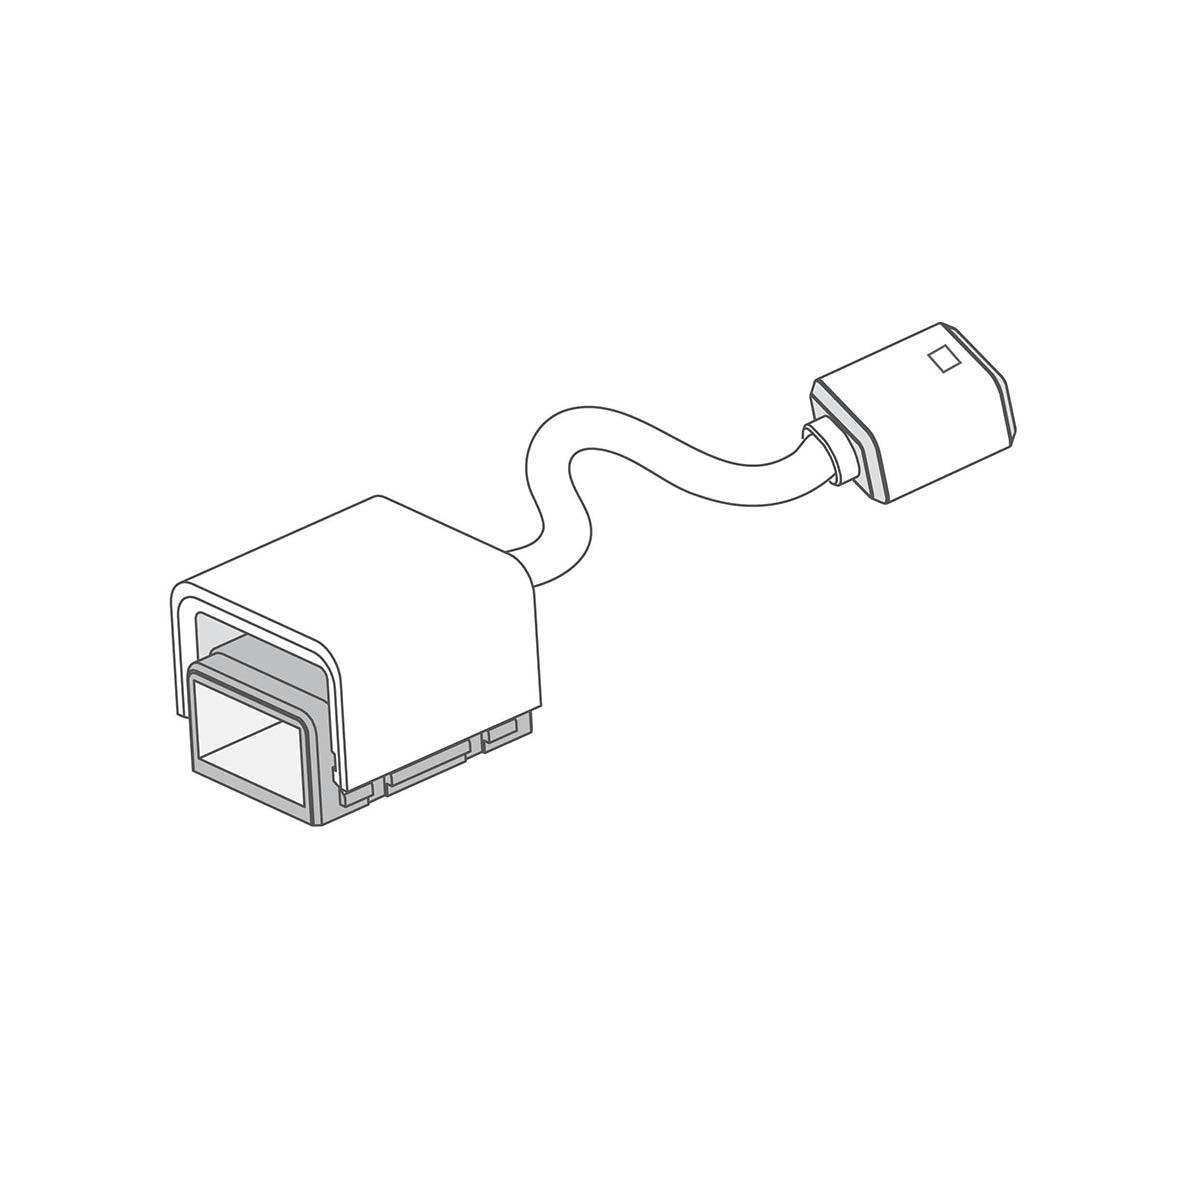 Power Supply Link Connector For Hydrolume Series - Bees Lighting